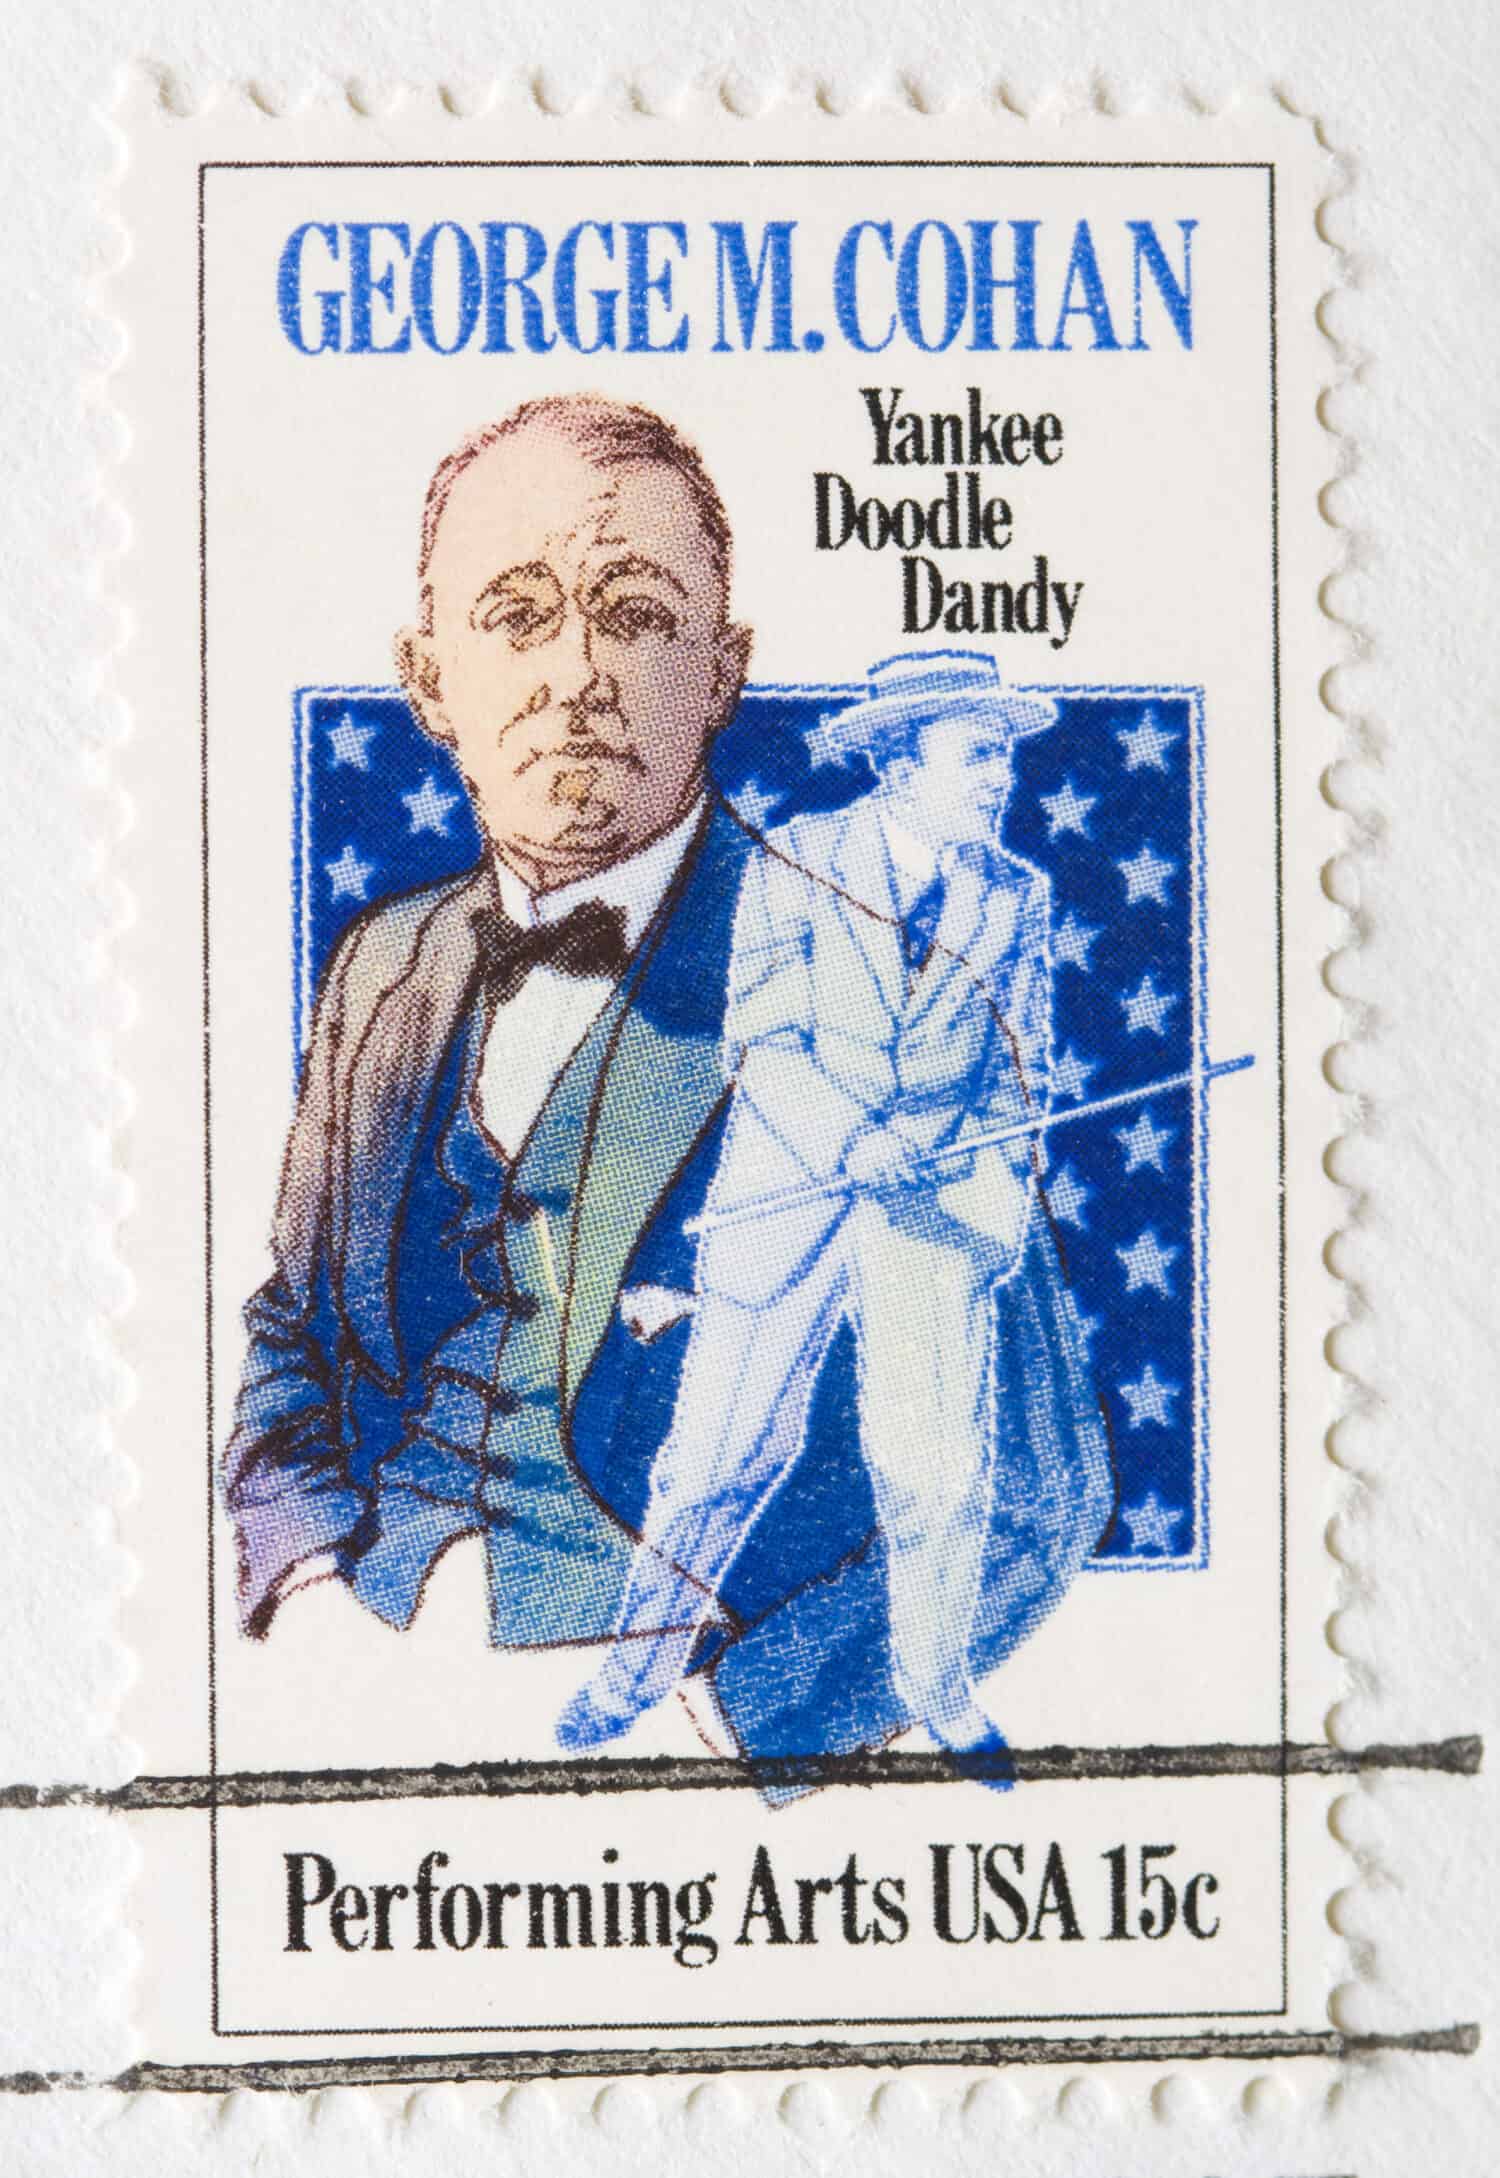 UNITED STATES - CIRCA 1978: stamp printed by United states, shows George Cohan, circa 1978